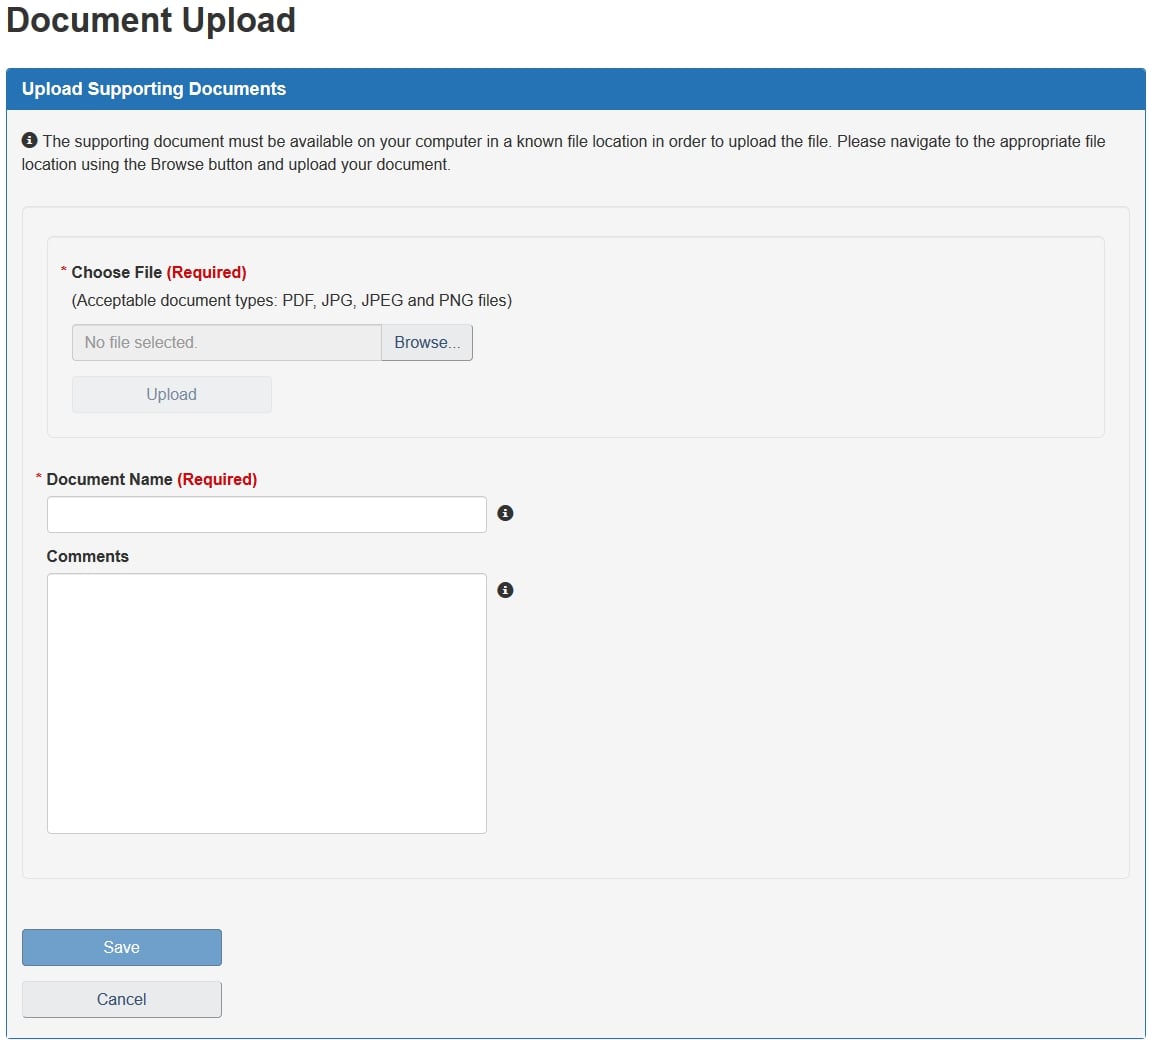 Upload Supporting Documents section. Description follows.